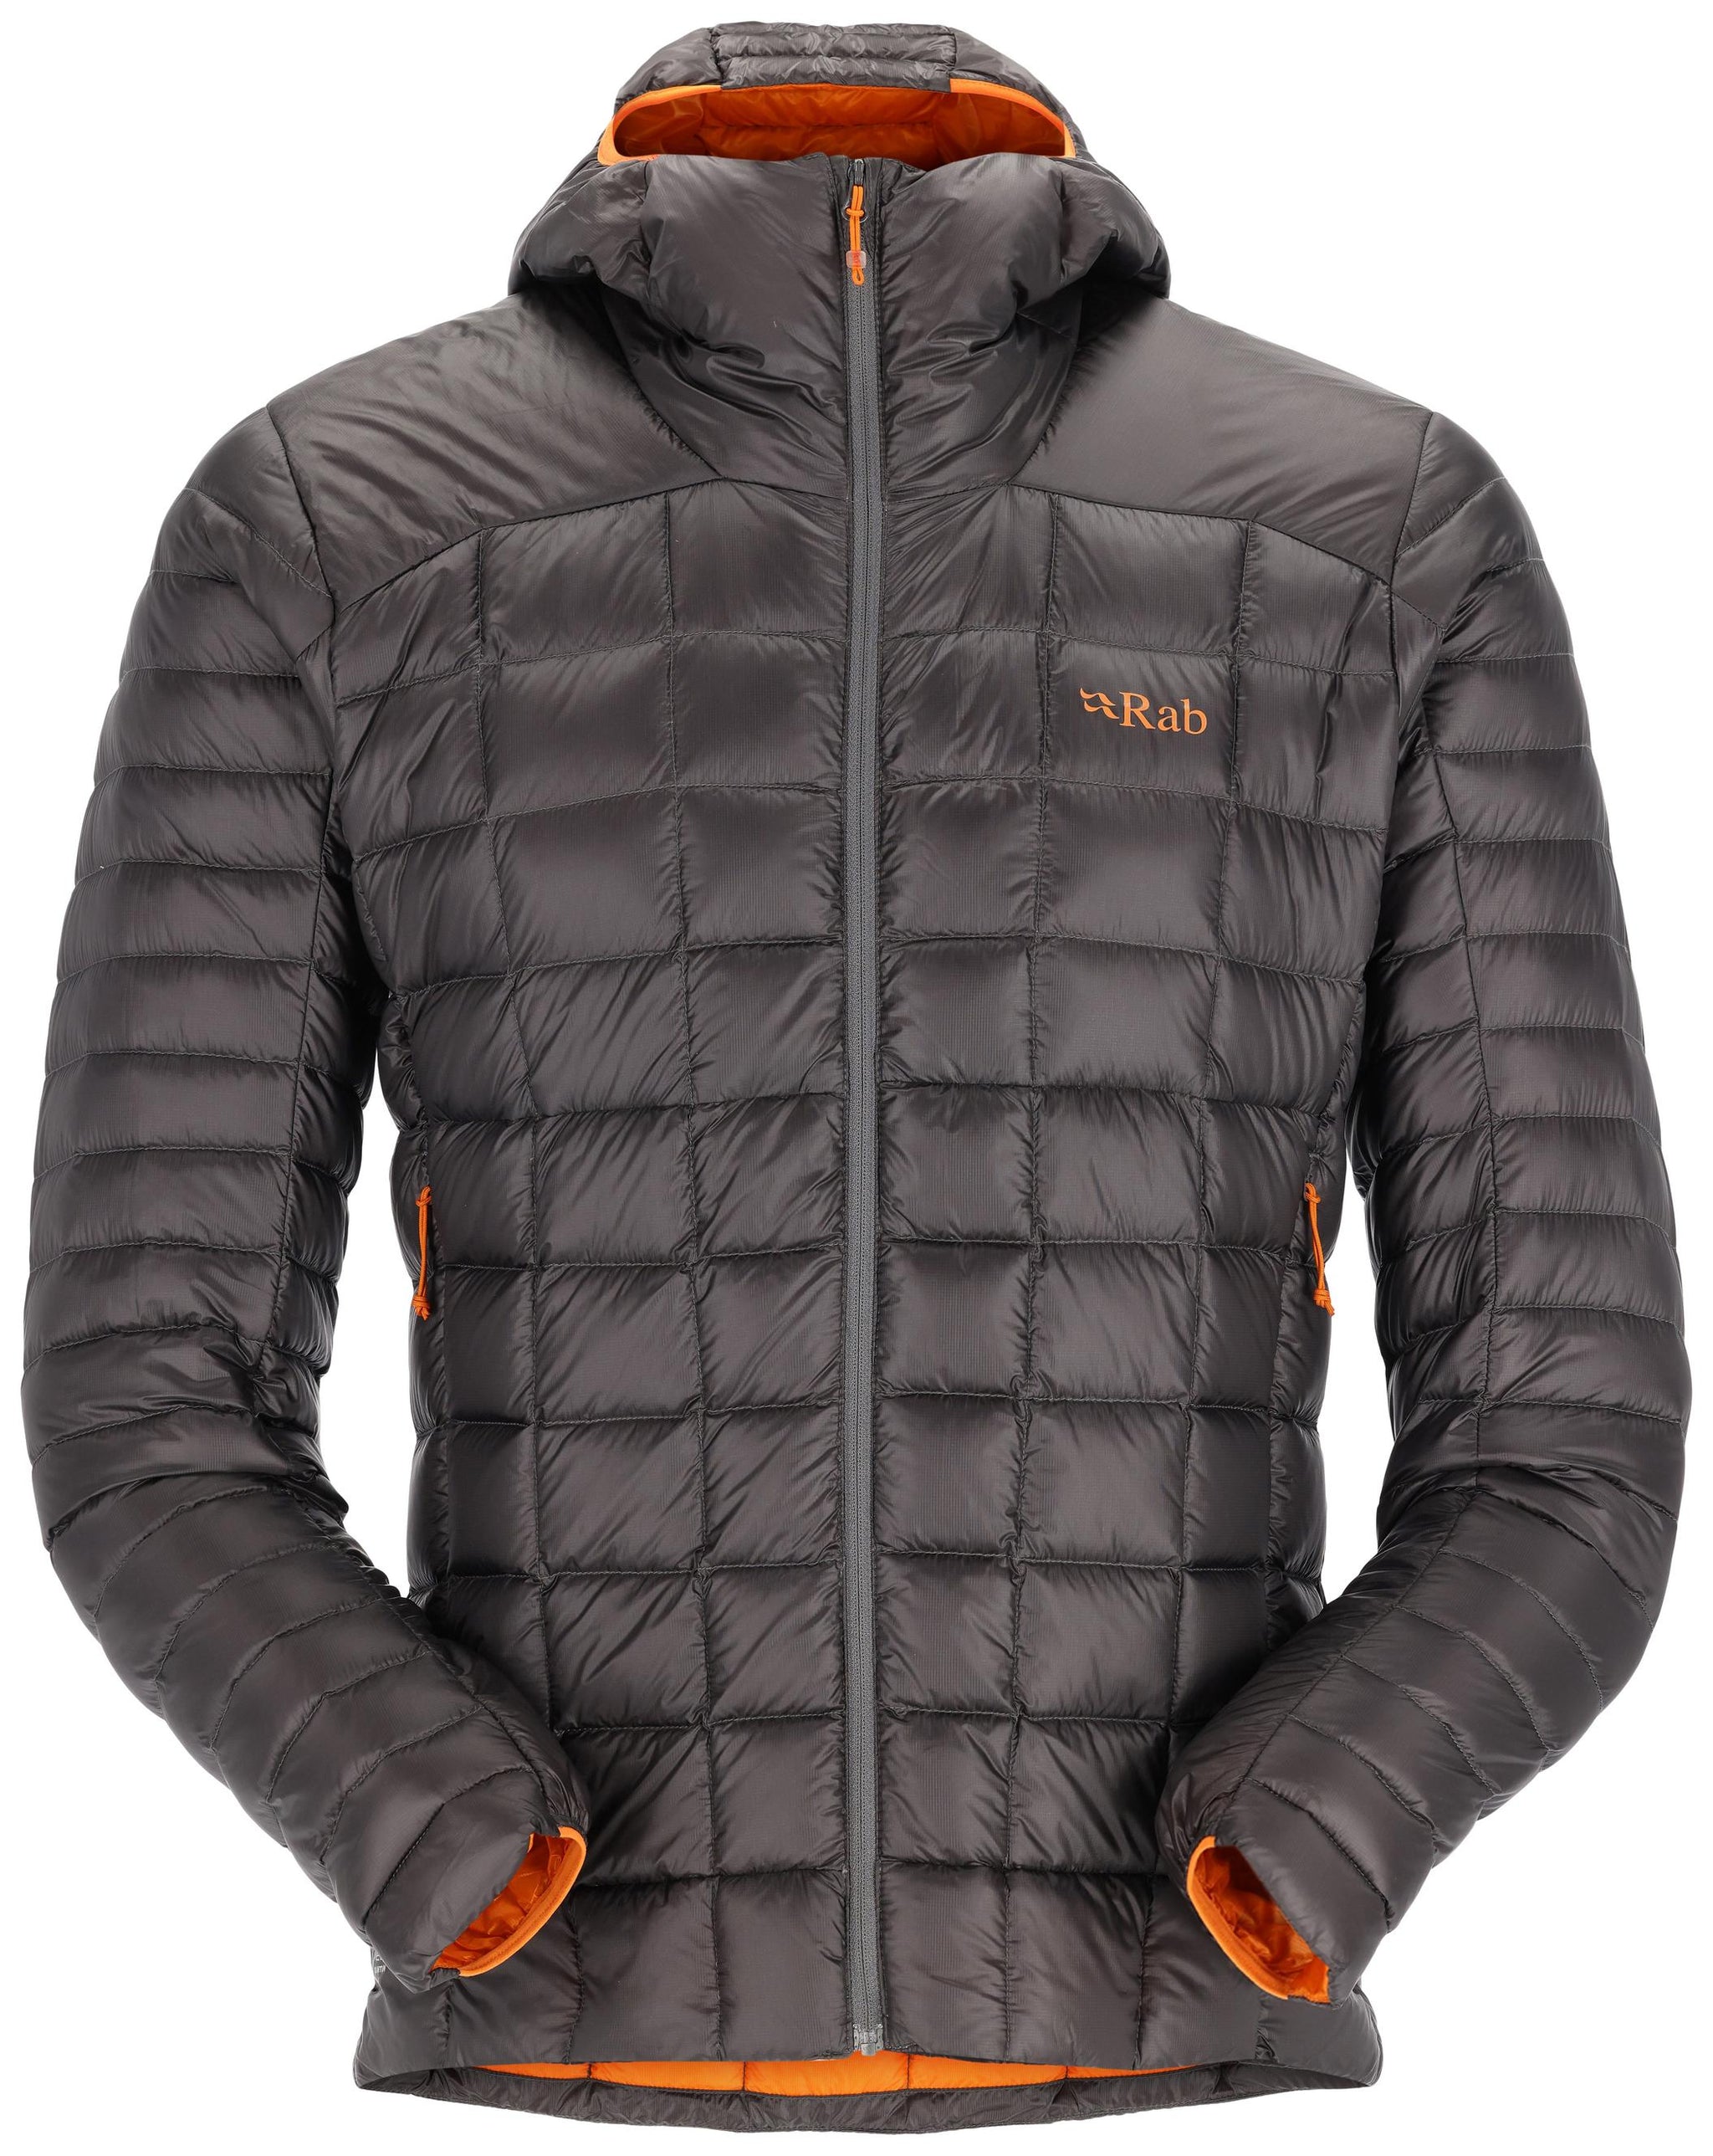 Rab Men's Mythic Alpine Light Down Jacket - outfittersstore.nz